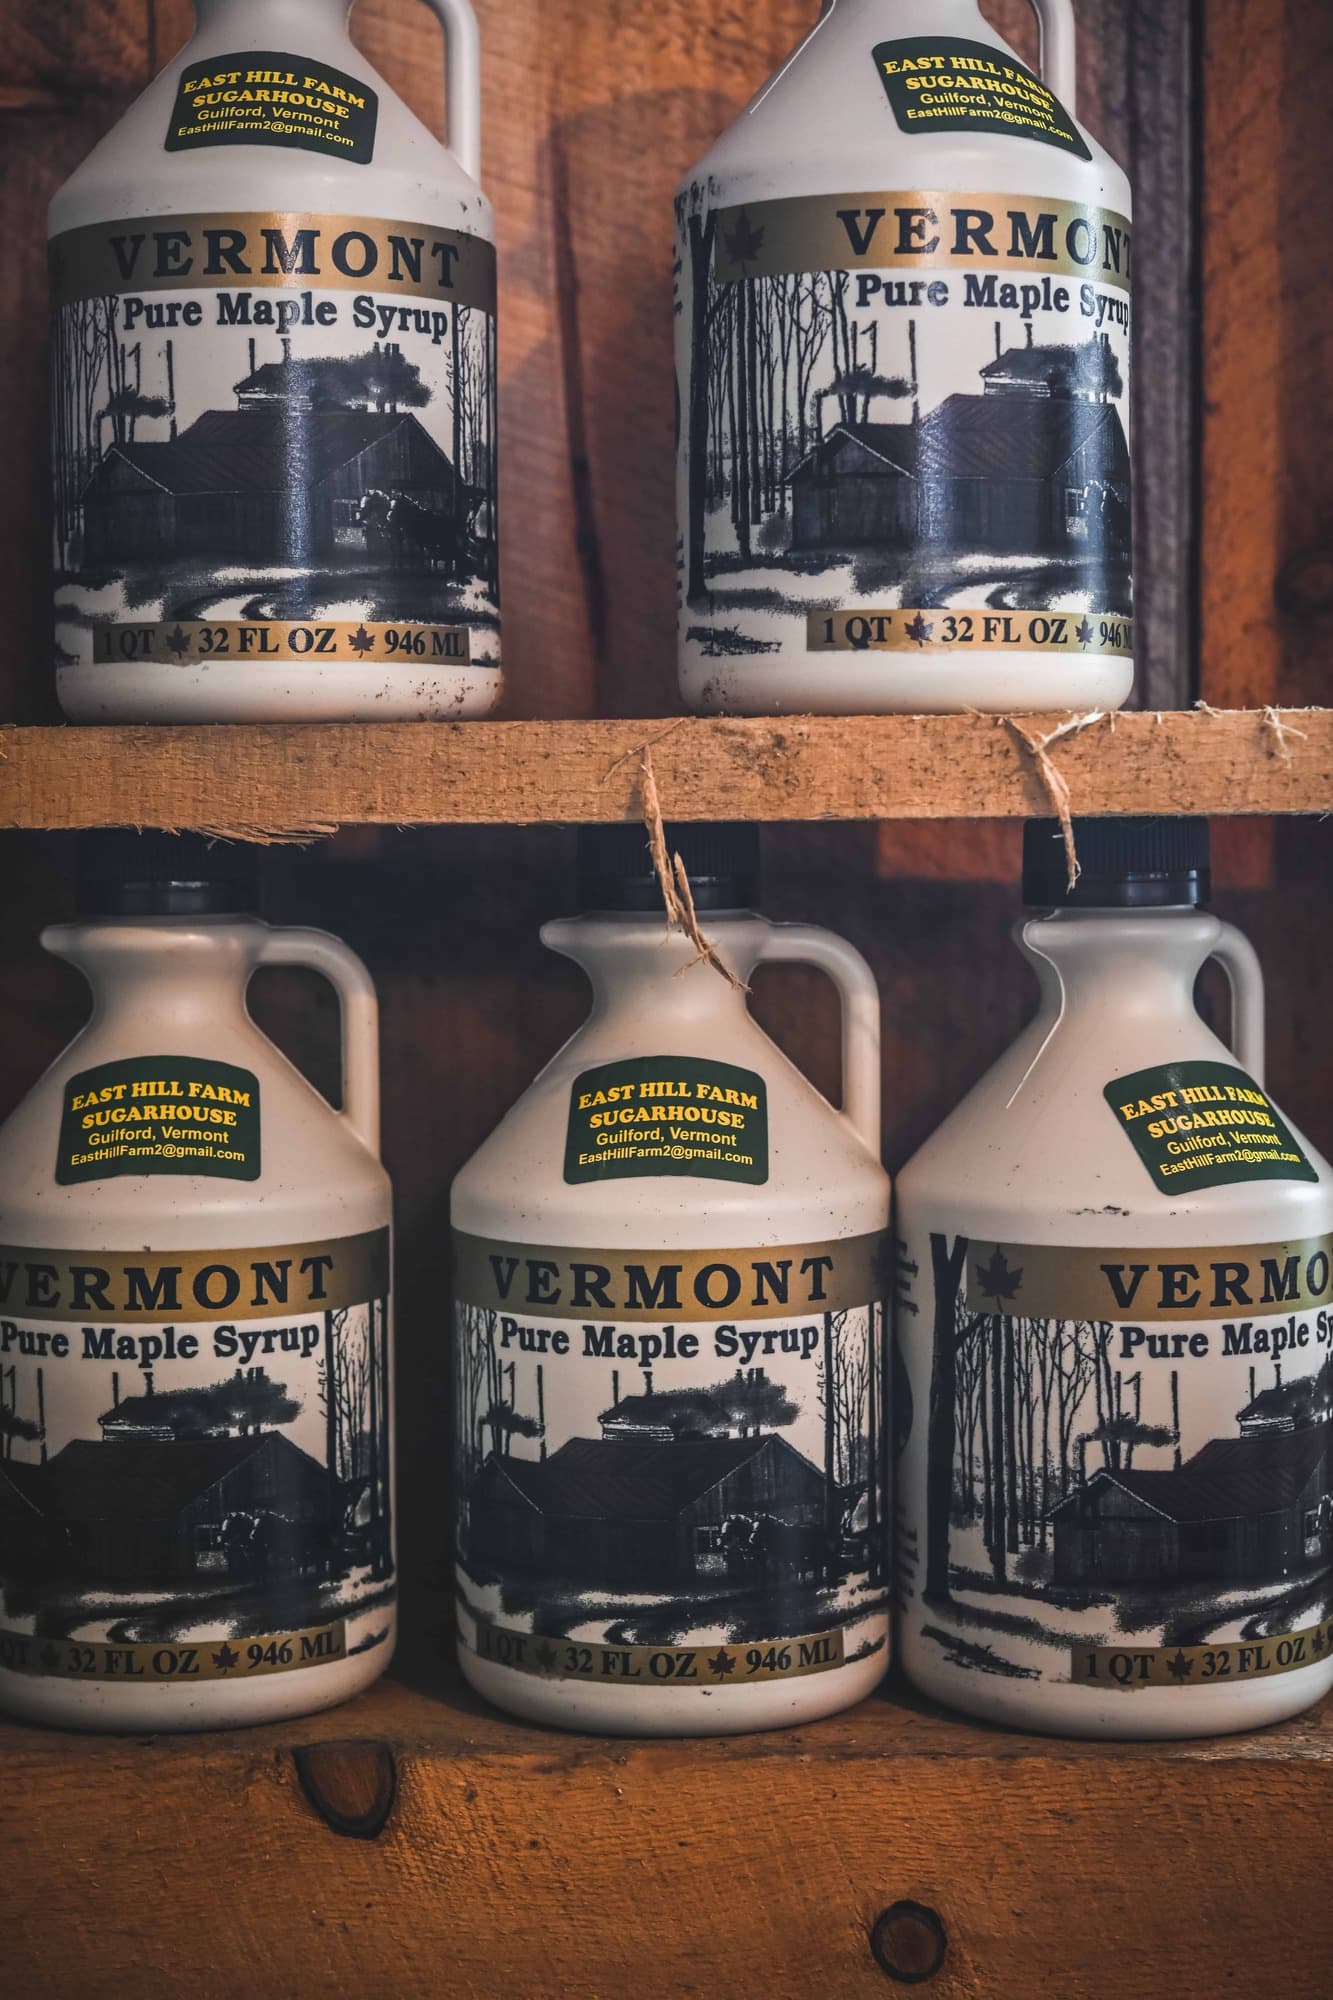 Close up of large jugs of Vermont maple syrup on wood shelves